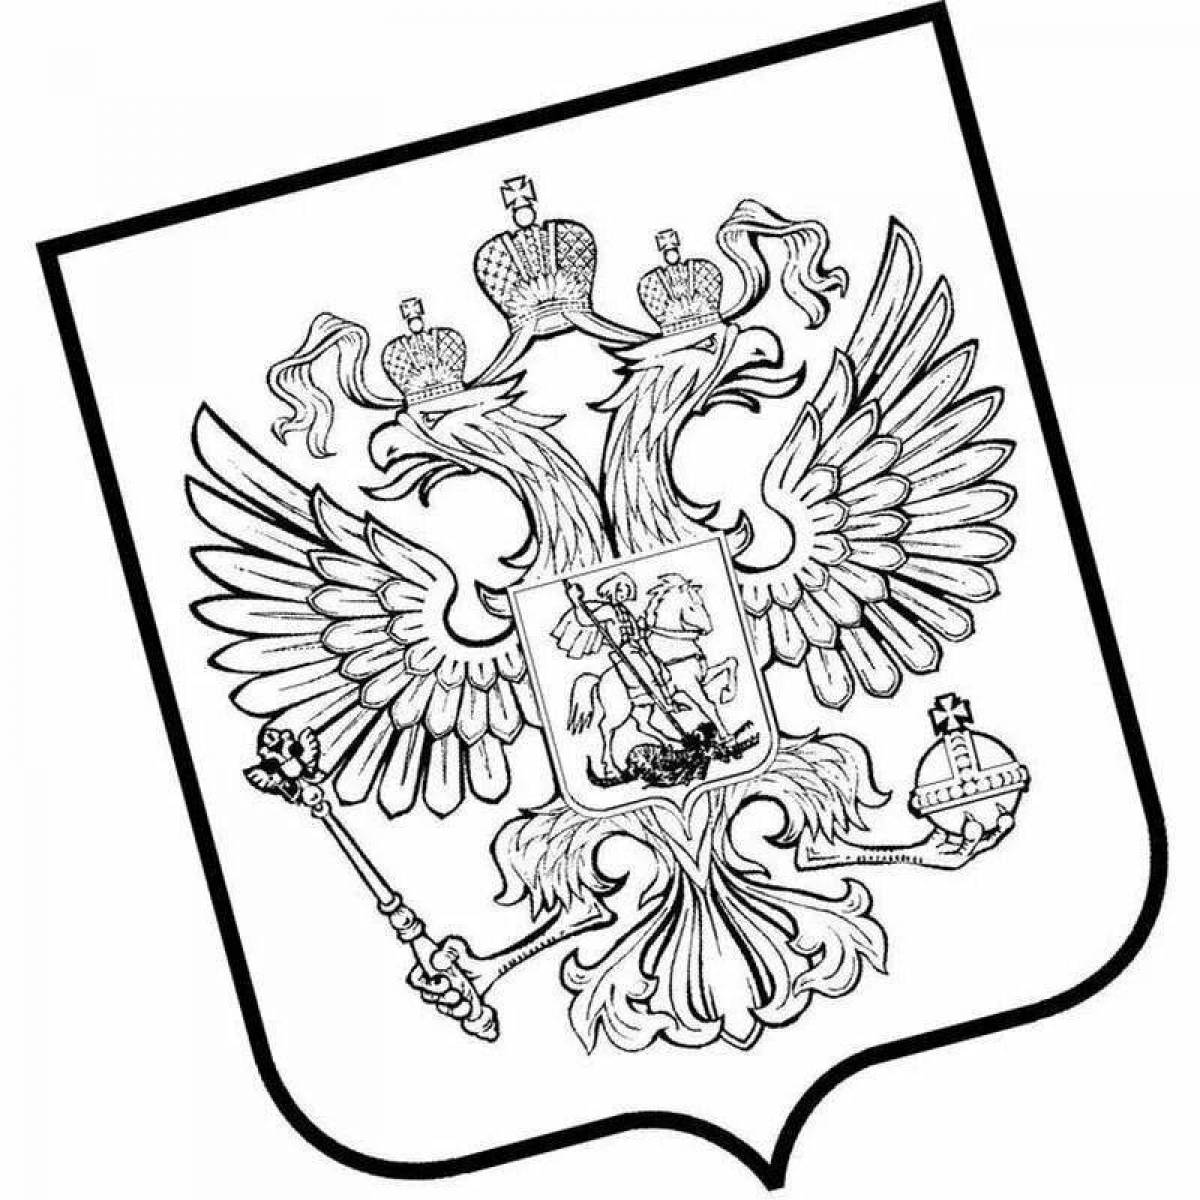 Coat of arms of the Russian Federation #15